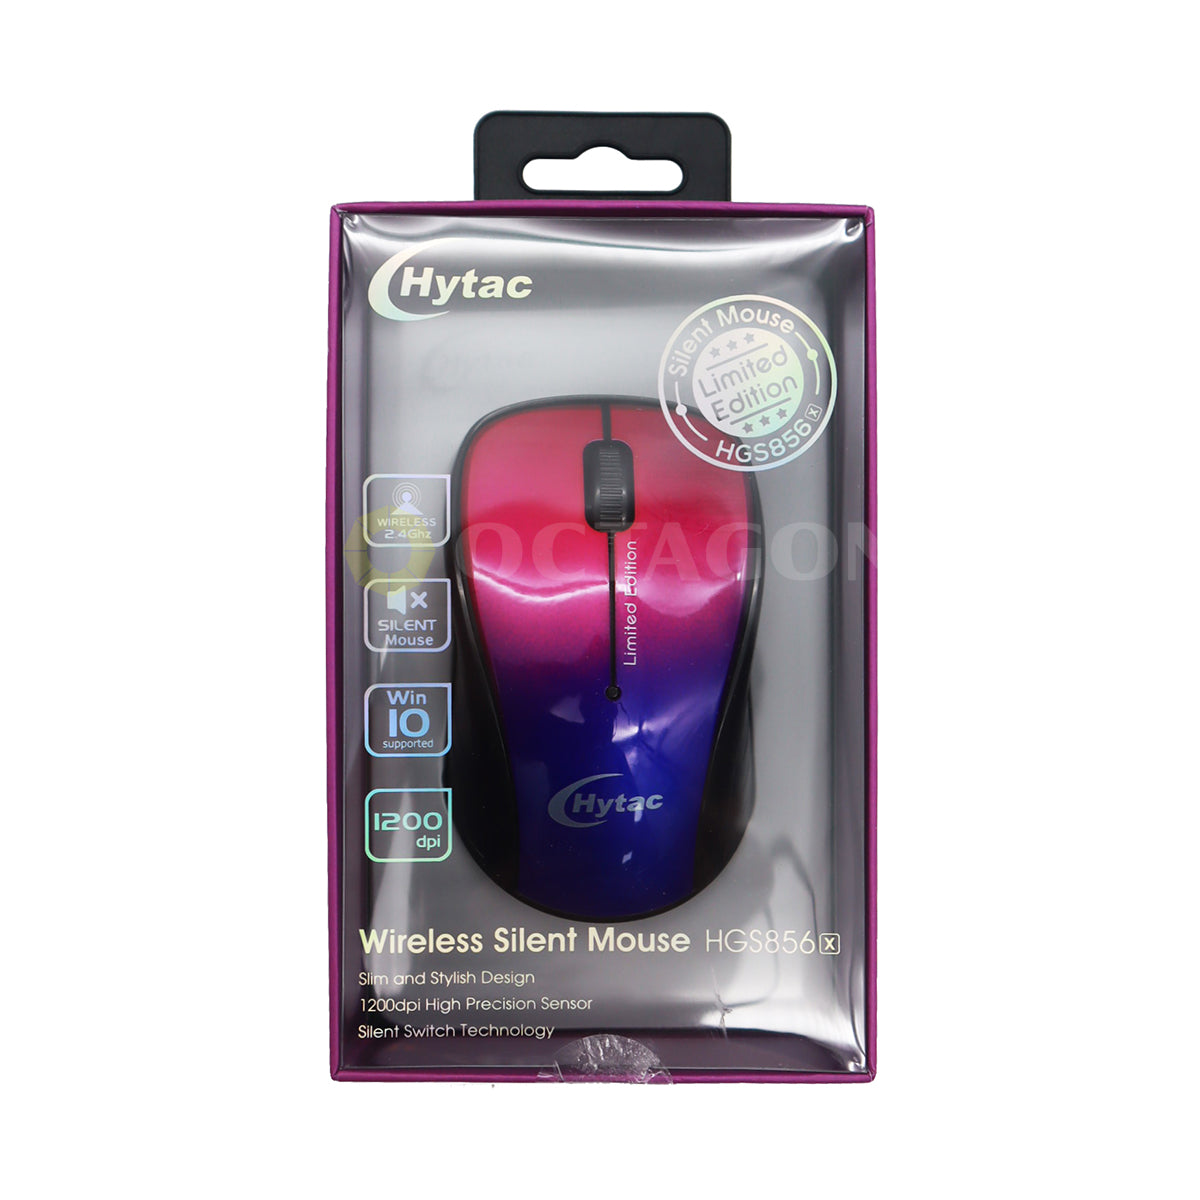 HYTAC HGS856 RED/BLUE SILENT WIRELESS